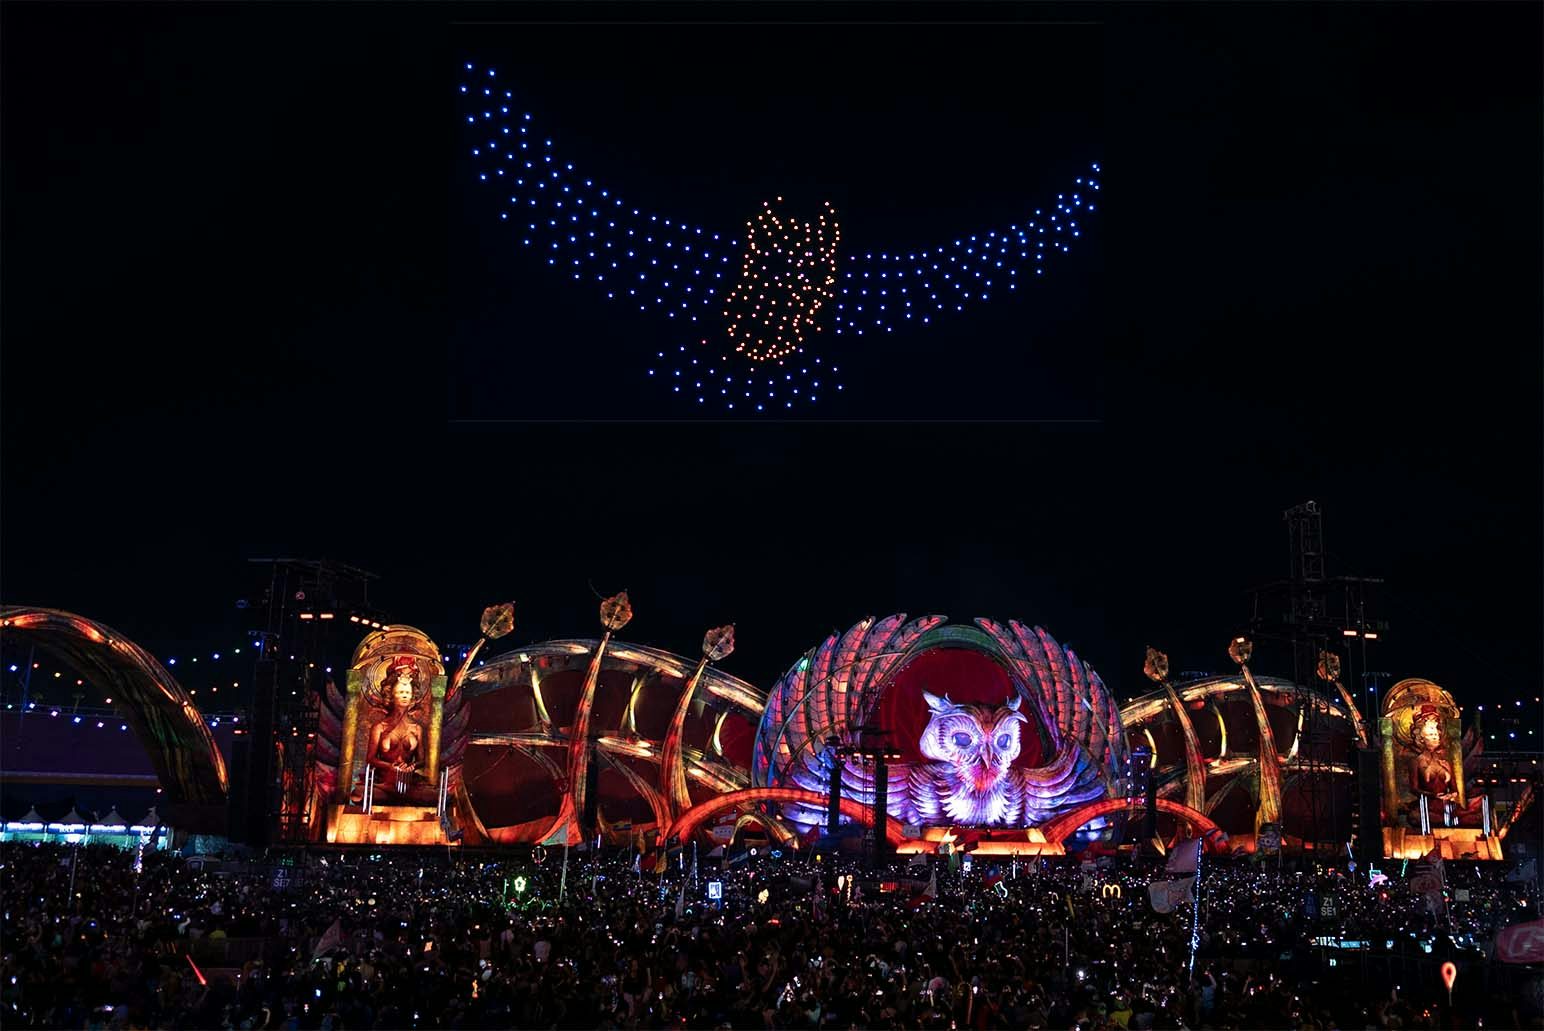 Drone technology pioneers Verge Aero and Drone Stories joined forces in October to deliver an incredible, perfectly programmed show to mark the 25th anniversary of Electric Daisy Carnival in Las Vegas.